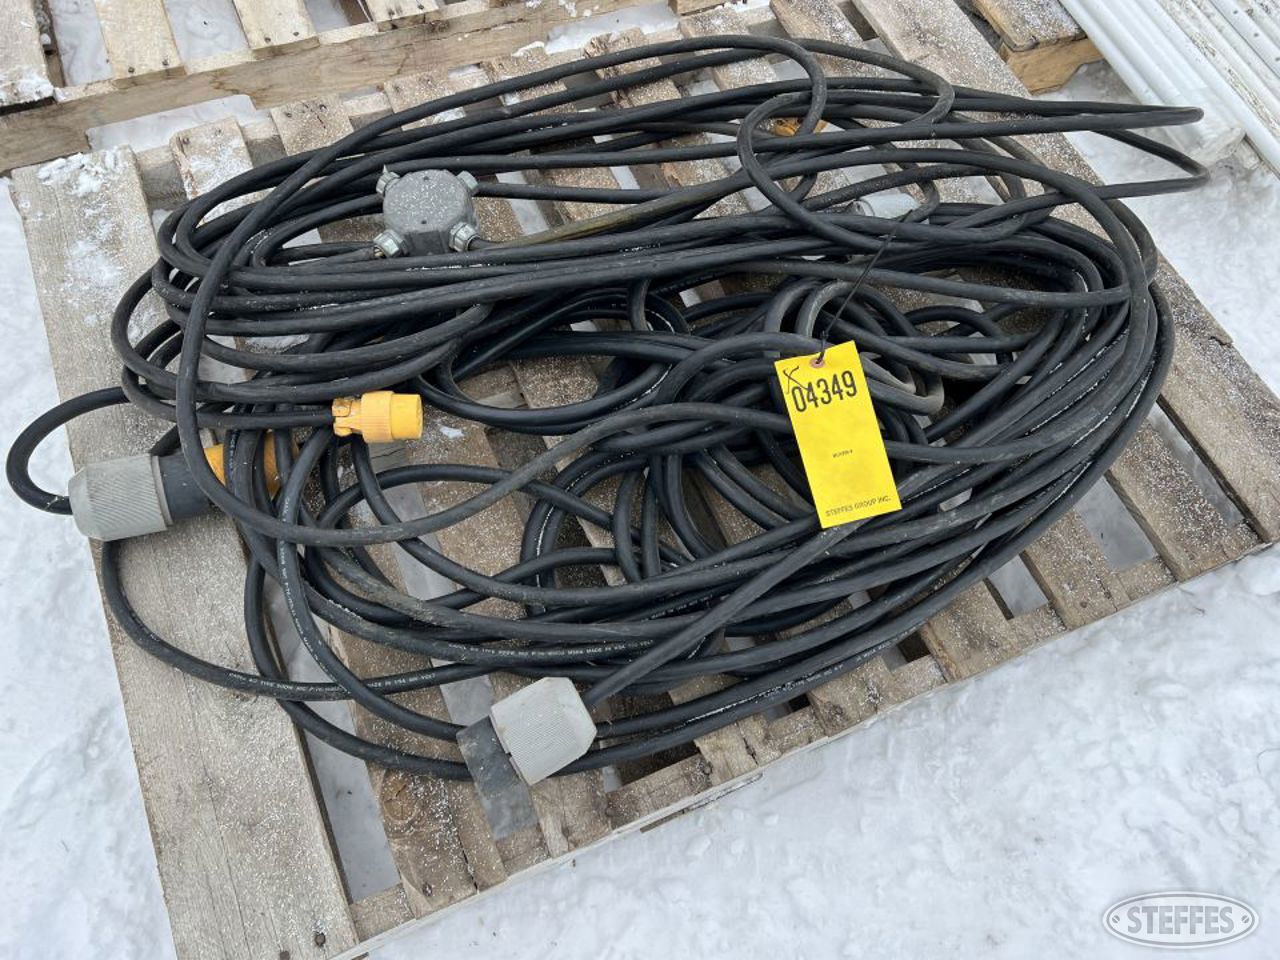 220v extension cables